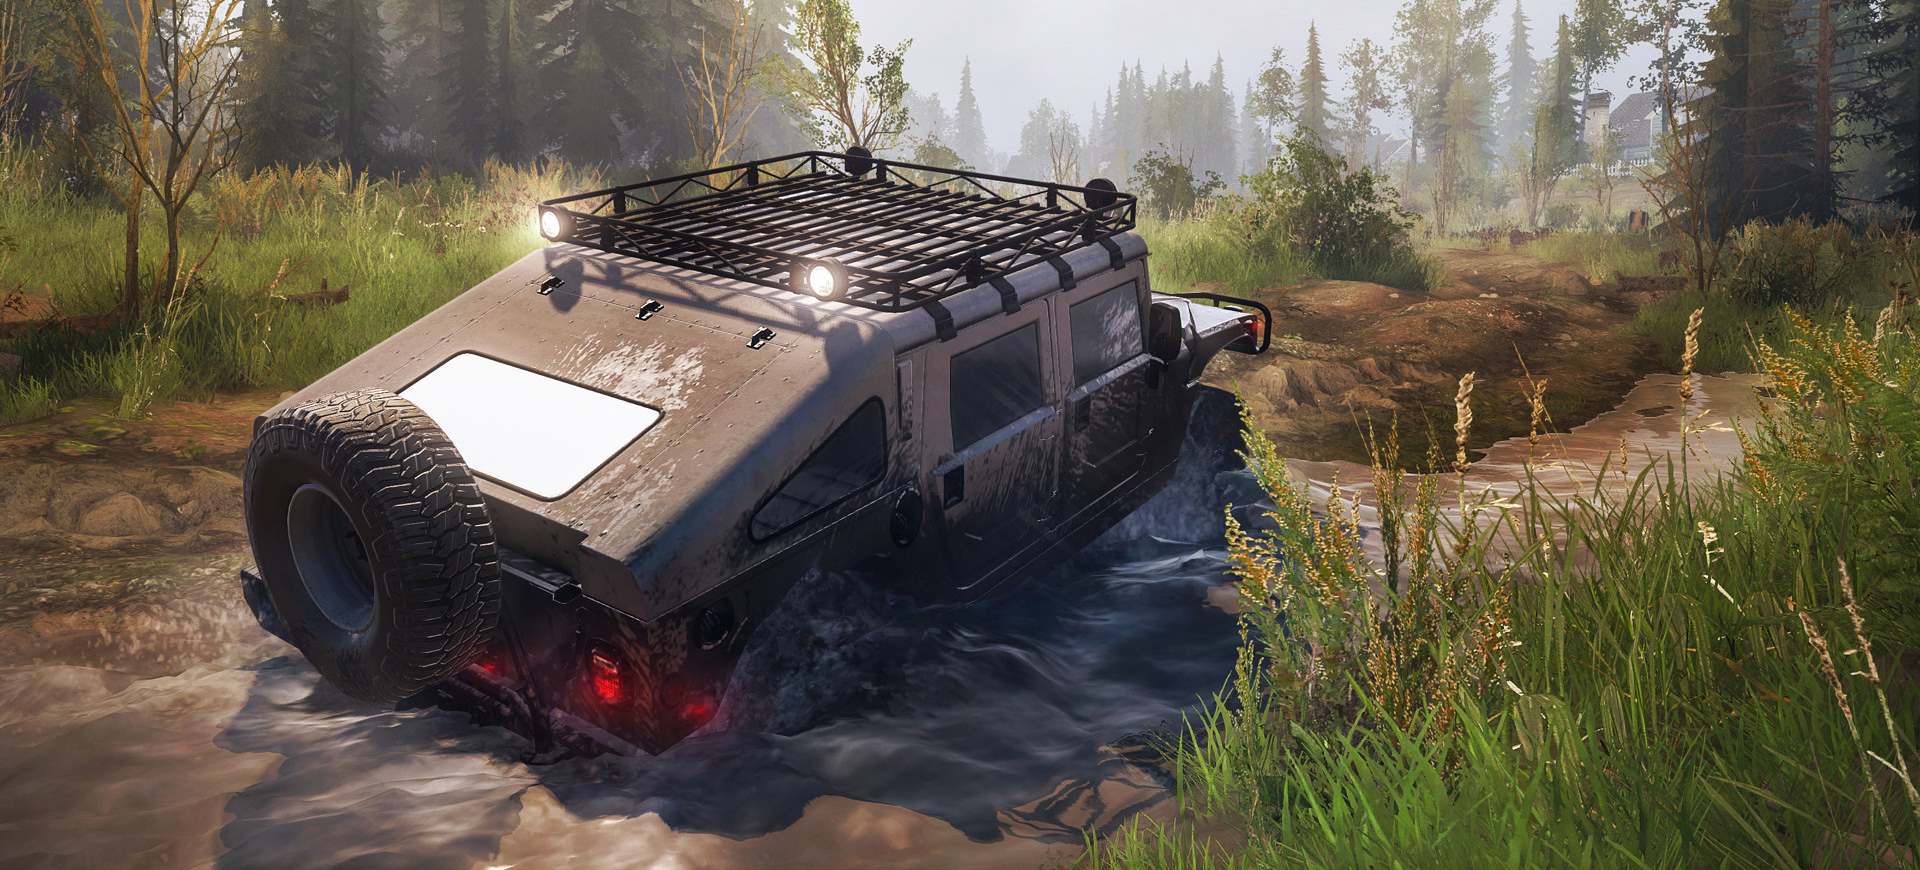 spintires-mudrunner-chinh-thuc-do-bo-len-he-may-switch.jpg